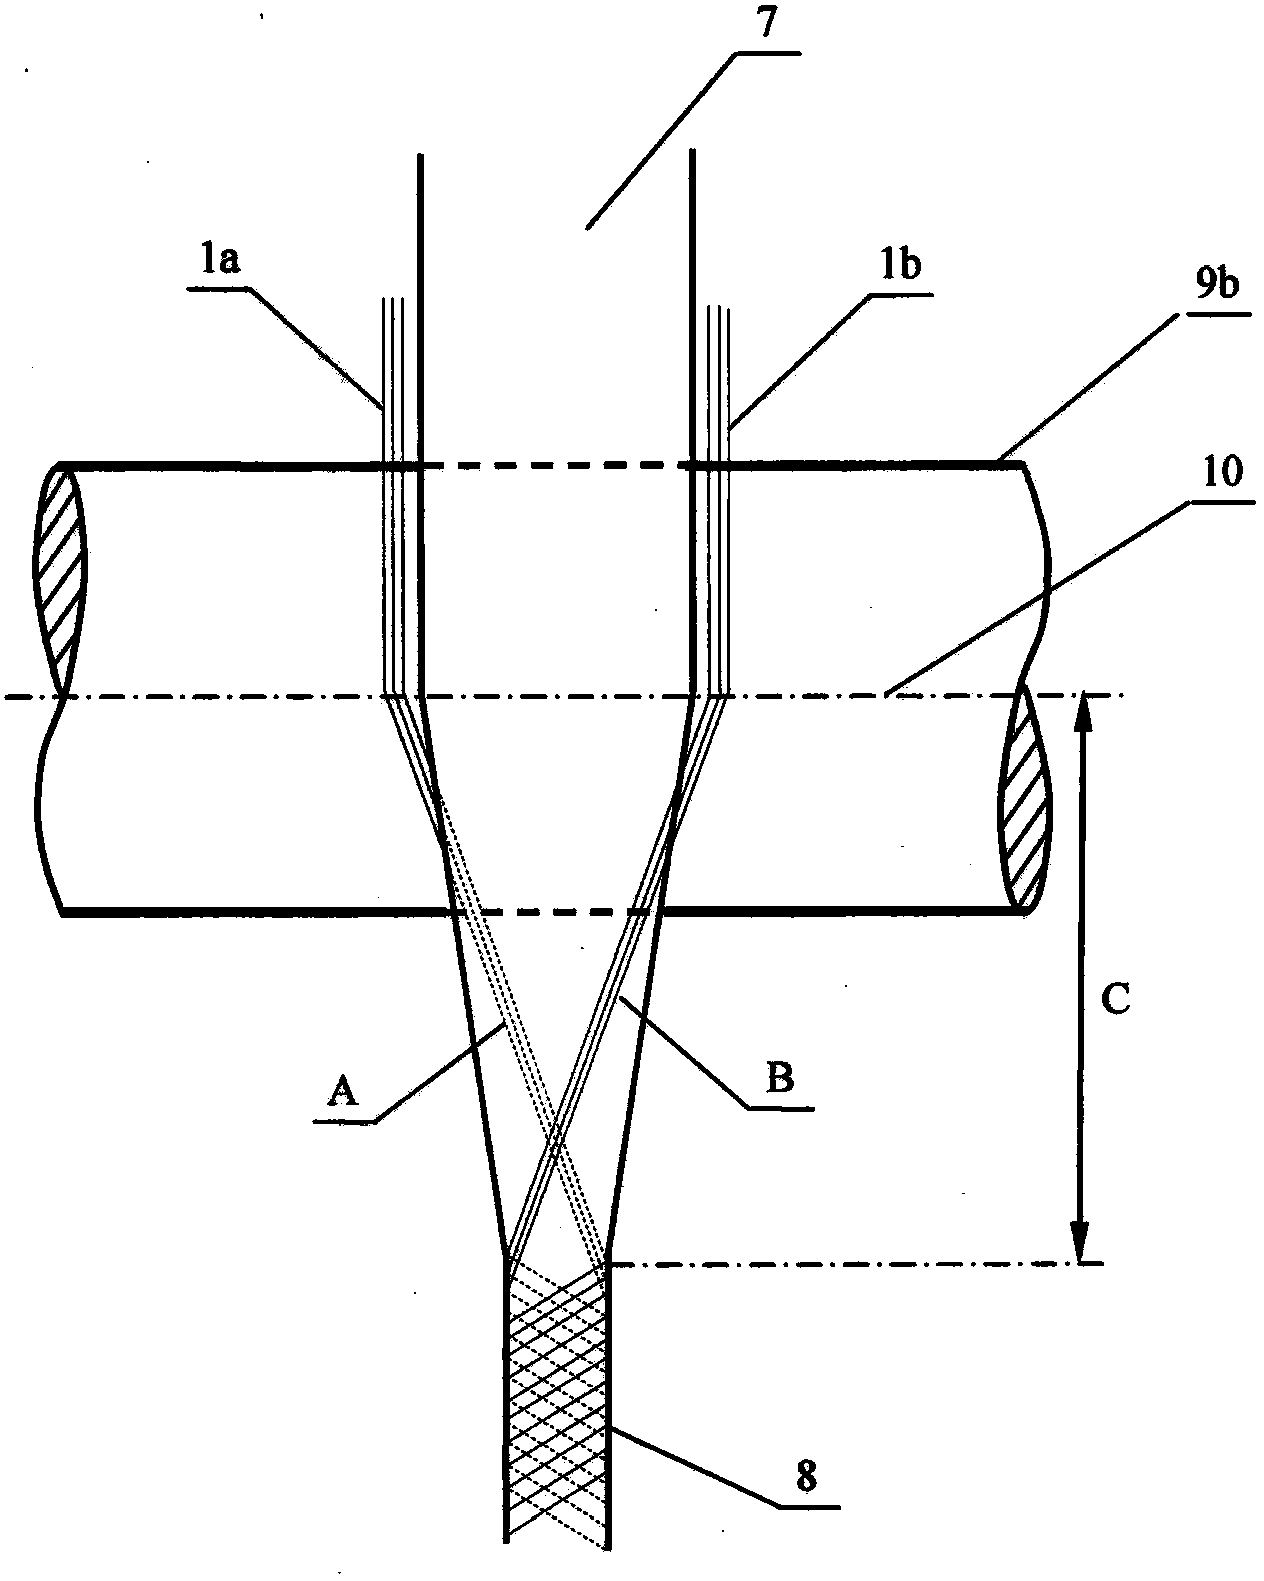 Filament splitting constant-tension double-side limiting composite spinning device, method and application